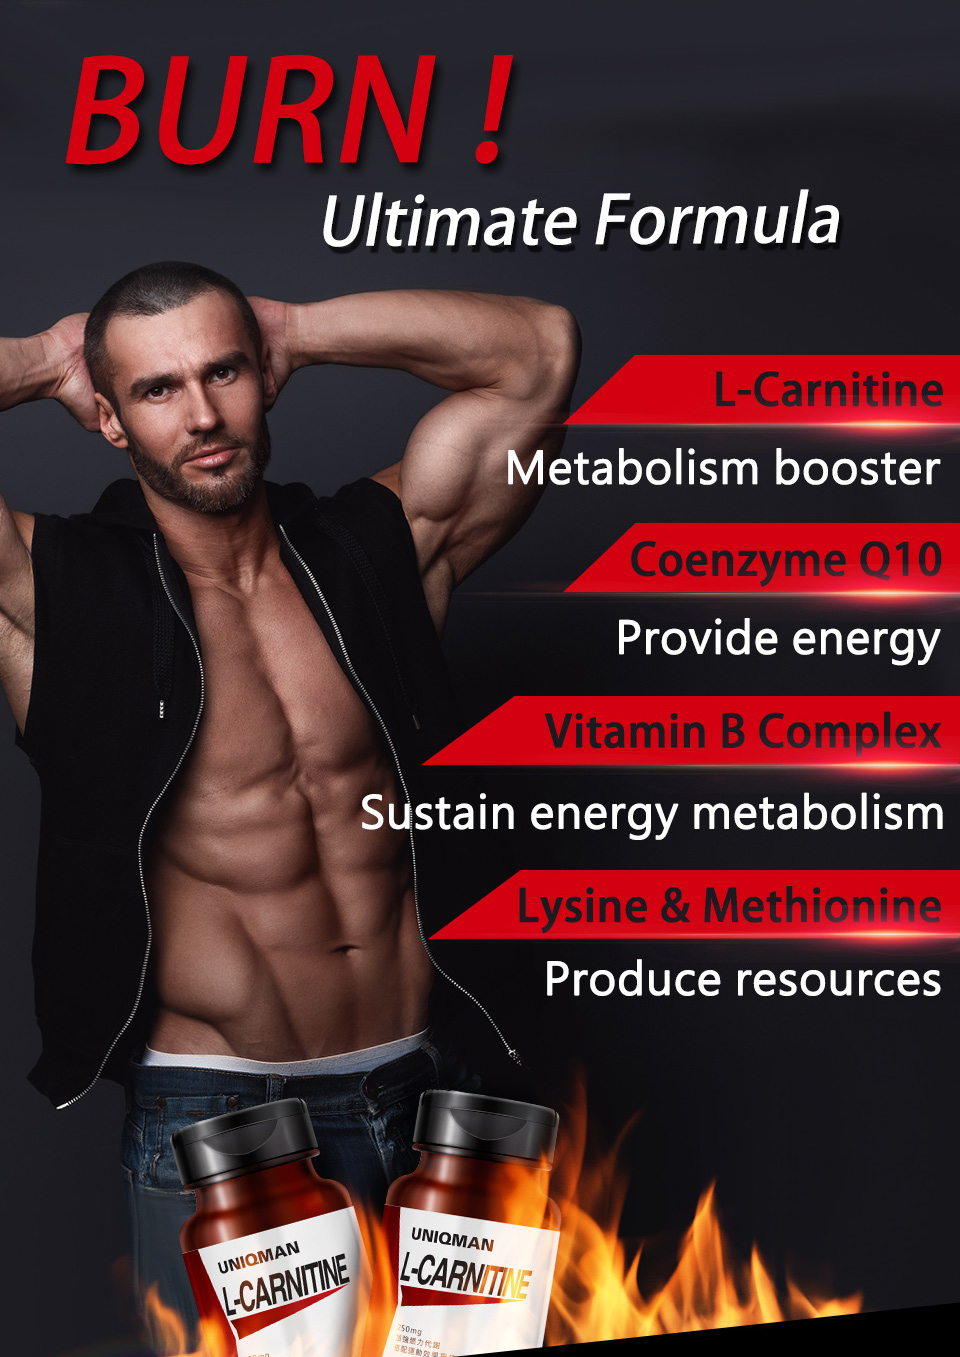 UNIQMAN L-carnitine provides energy and burns fat in our body